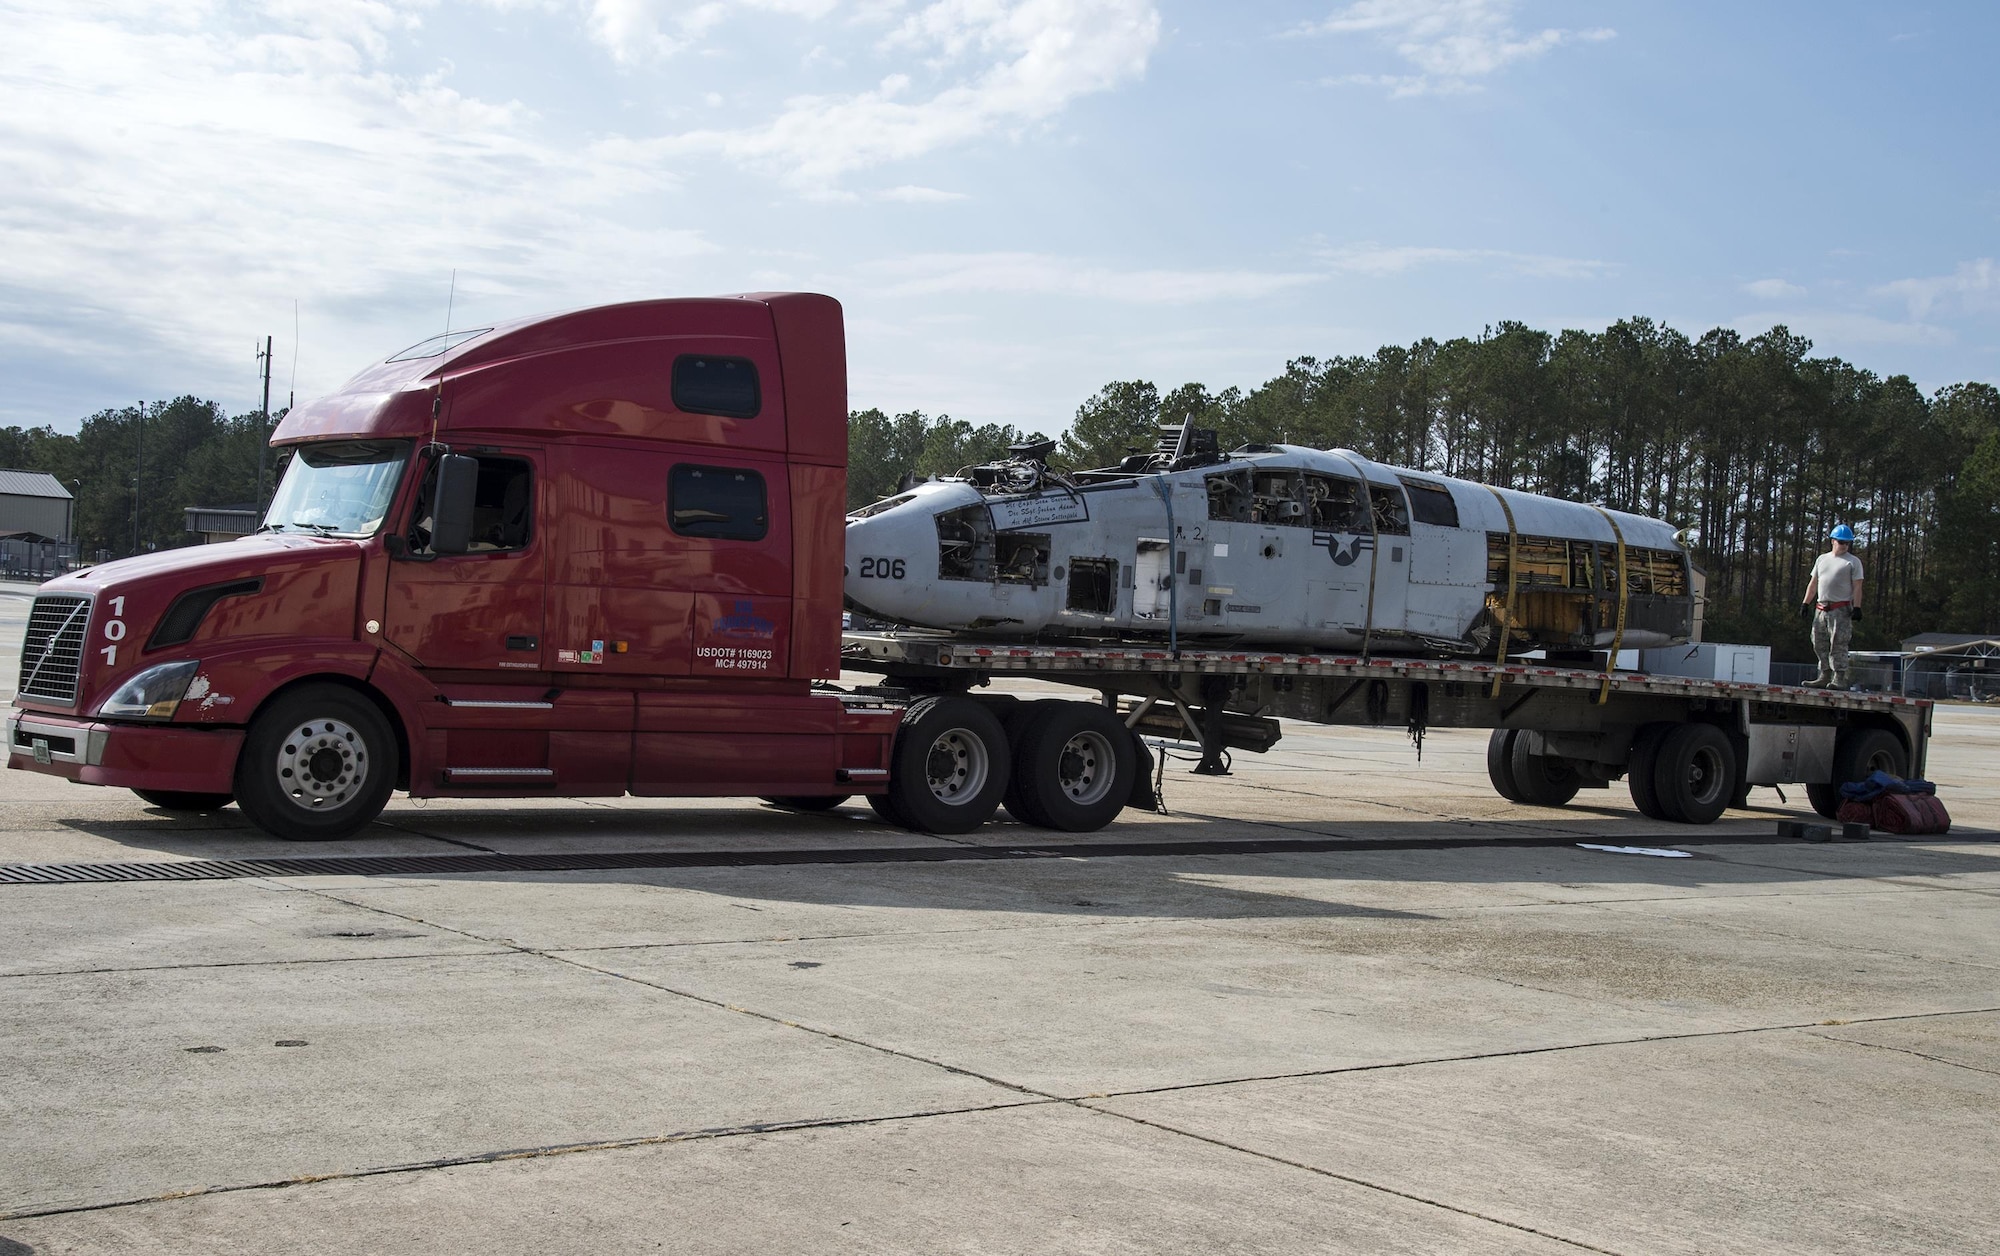 The fuselage of an A-10A Thunderbolt II sits on a flatbed truck, Dec. 1, 2016, at Moody Air Force Base, Ga. This A-10A was assigned to Air Force bases in South Carolina, the United Kingdom and Arizona before it was brought to Moody in 2011 and used as a training aircraft. During its lifetime this A-10A accrued 10,812.1 flying hours and fired 162,145 rounds from its gun. (U.S. Air Force photo by Staff Sgt. Eric Summers)